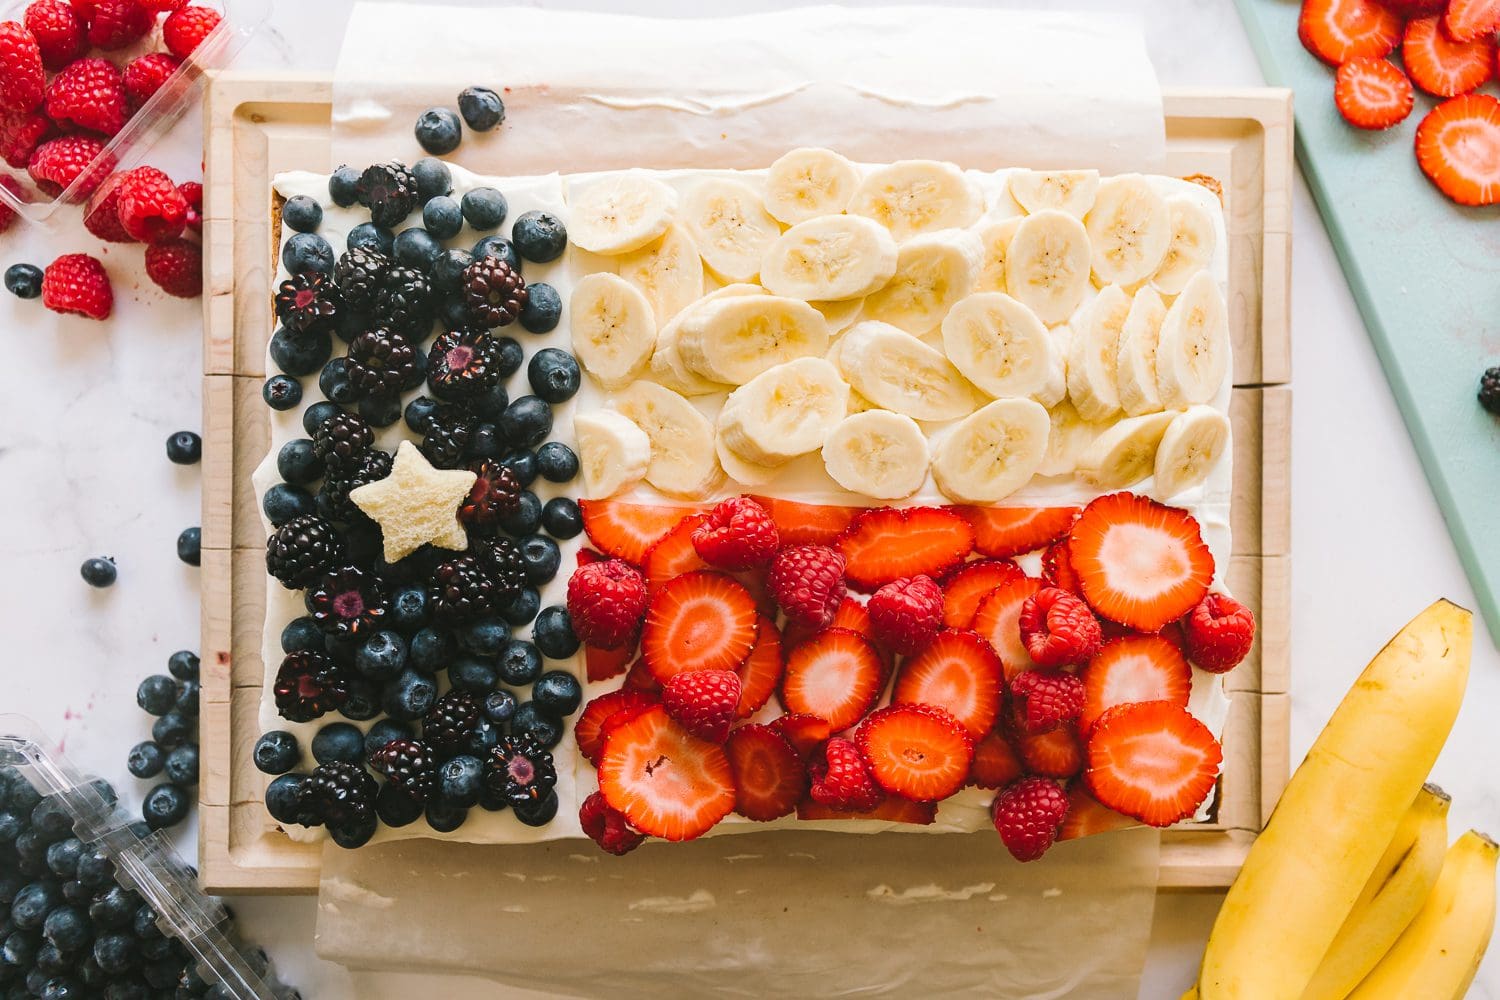 Cream Cheese 4th of July Cake, Texas StyleJoy the Baker